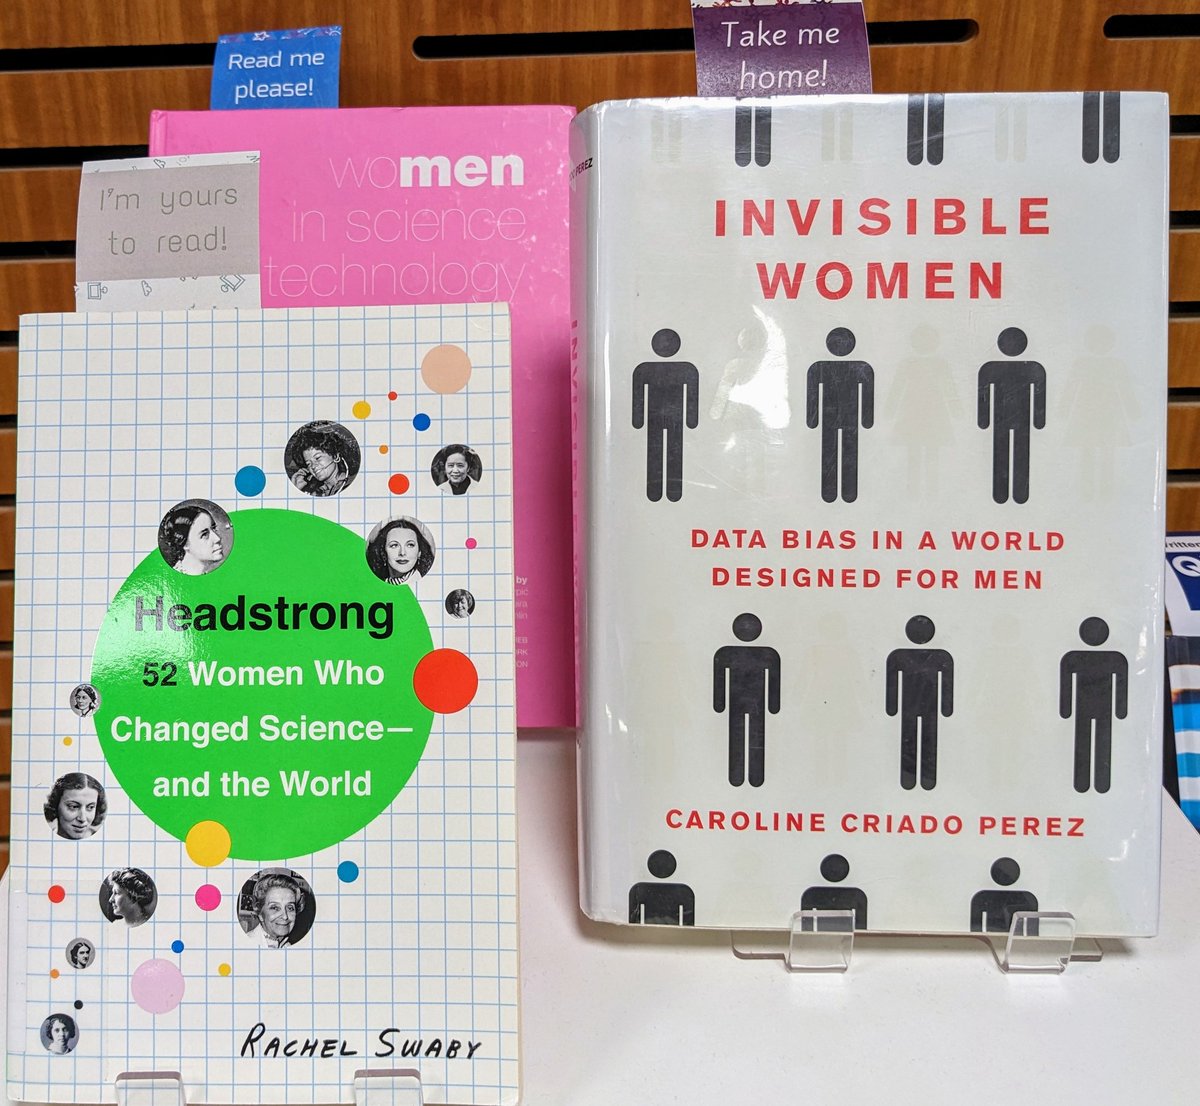 QUT Library is celebrating the International Day of Women and Girls in Science (11 Feb) with some inspirational books. Find them on display on LVL 4 Gardens Point Library or online. #QUTLibrary #WomenInScience #libraries qut.primo.exlibrisgroup.com/discovery/coll…